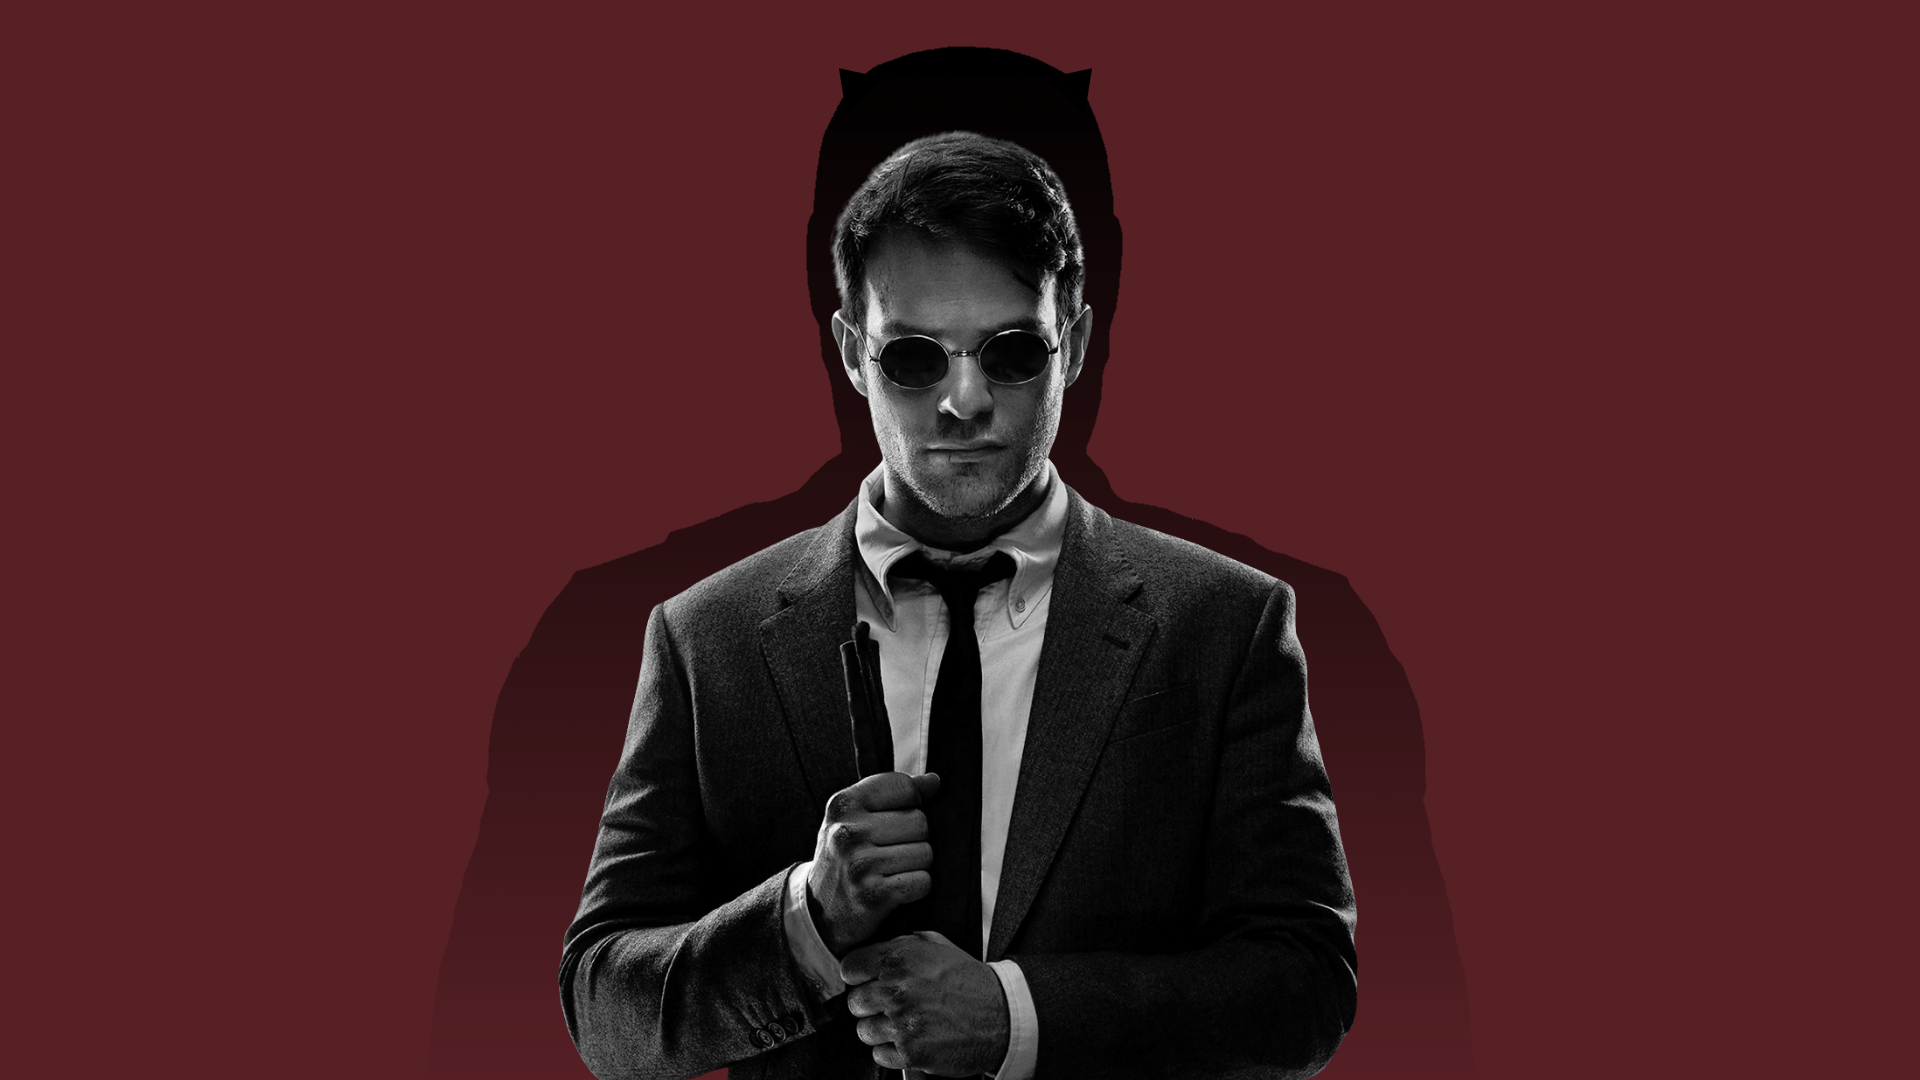 DAREDEVIL WALLPAPER I cant wait for the show so I made myself a wallpaper  with one of my favorite covers enjoy  rcomicbooks